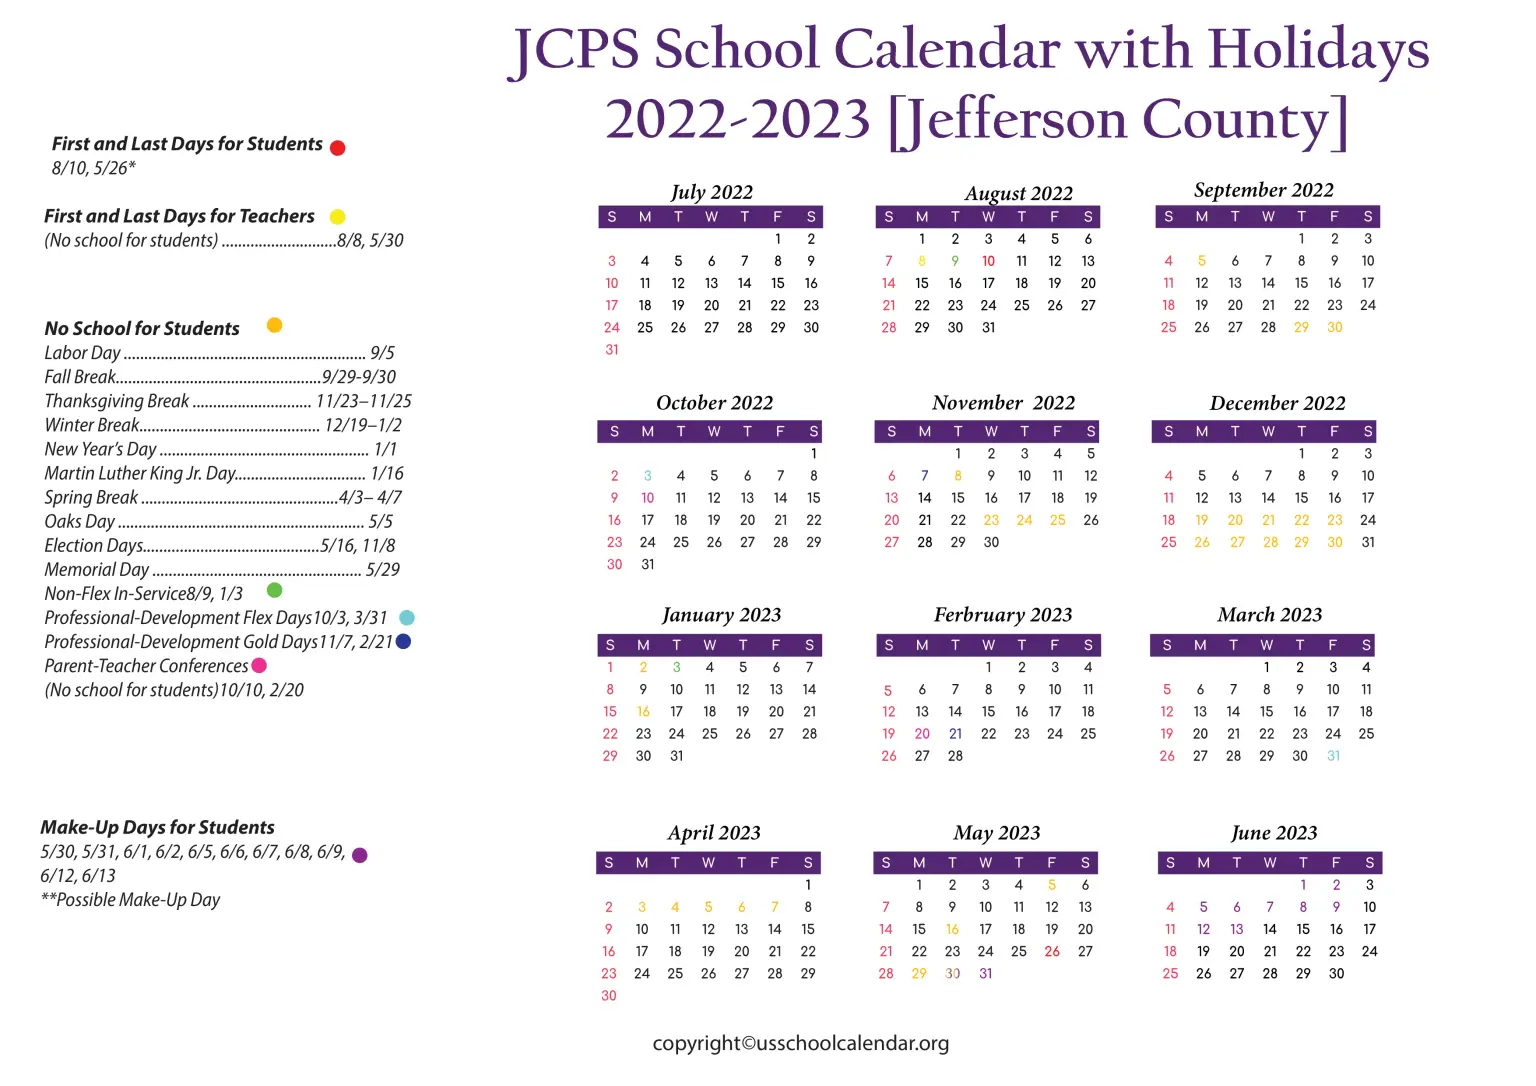 jcps-school-calendar-with-holidays-2022-2023-jefferson-county